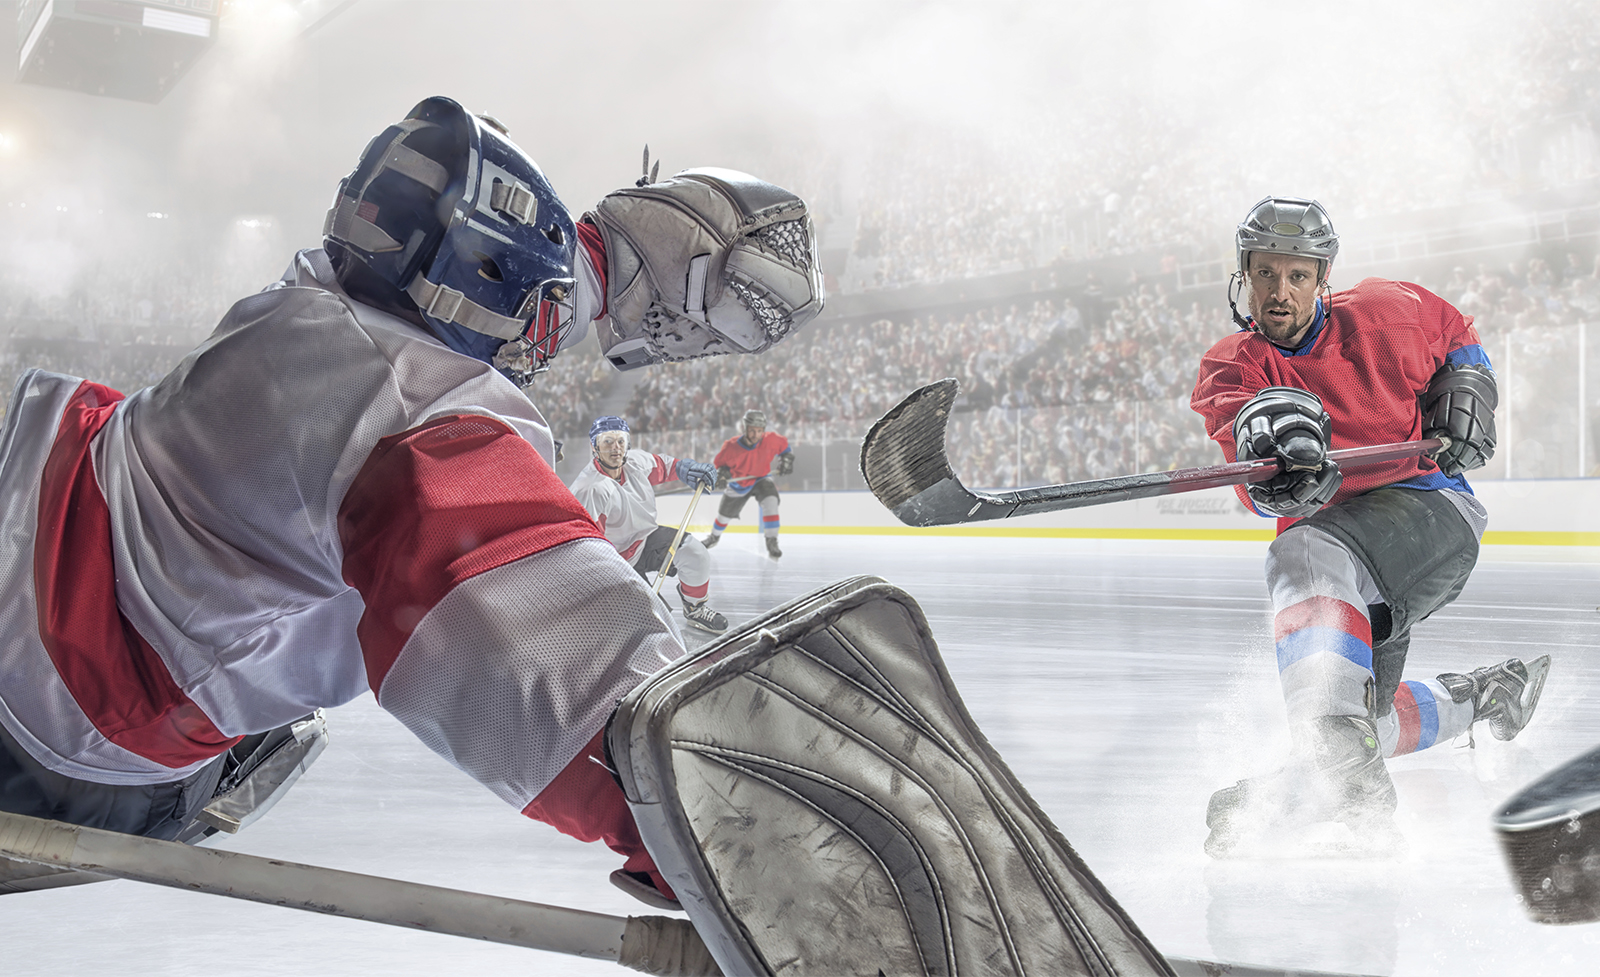 Ice Hockey Boys Teenager Bedroom Photo Wallpaper Wall Mural Picture